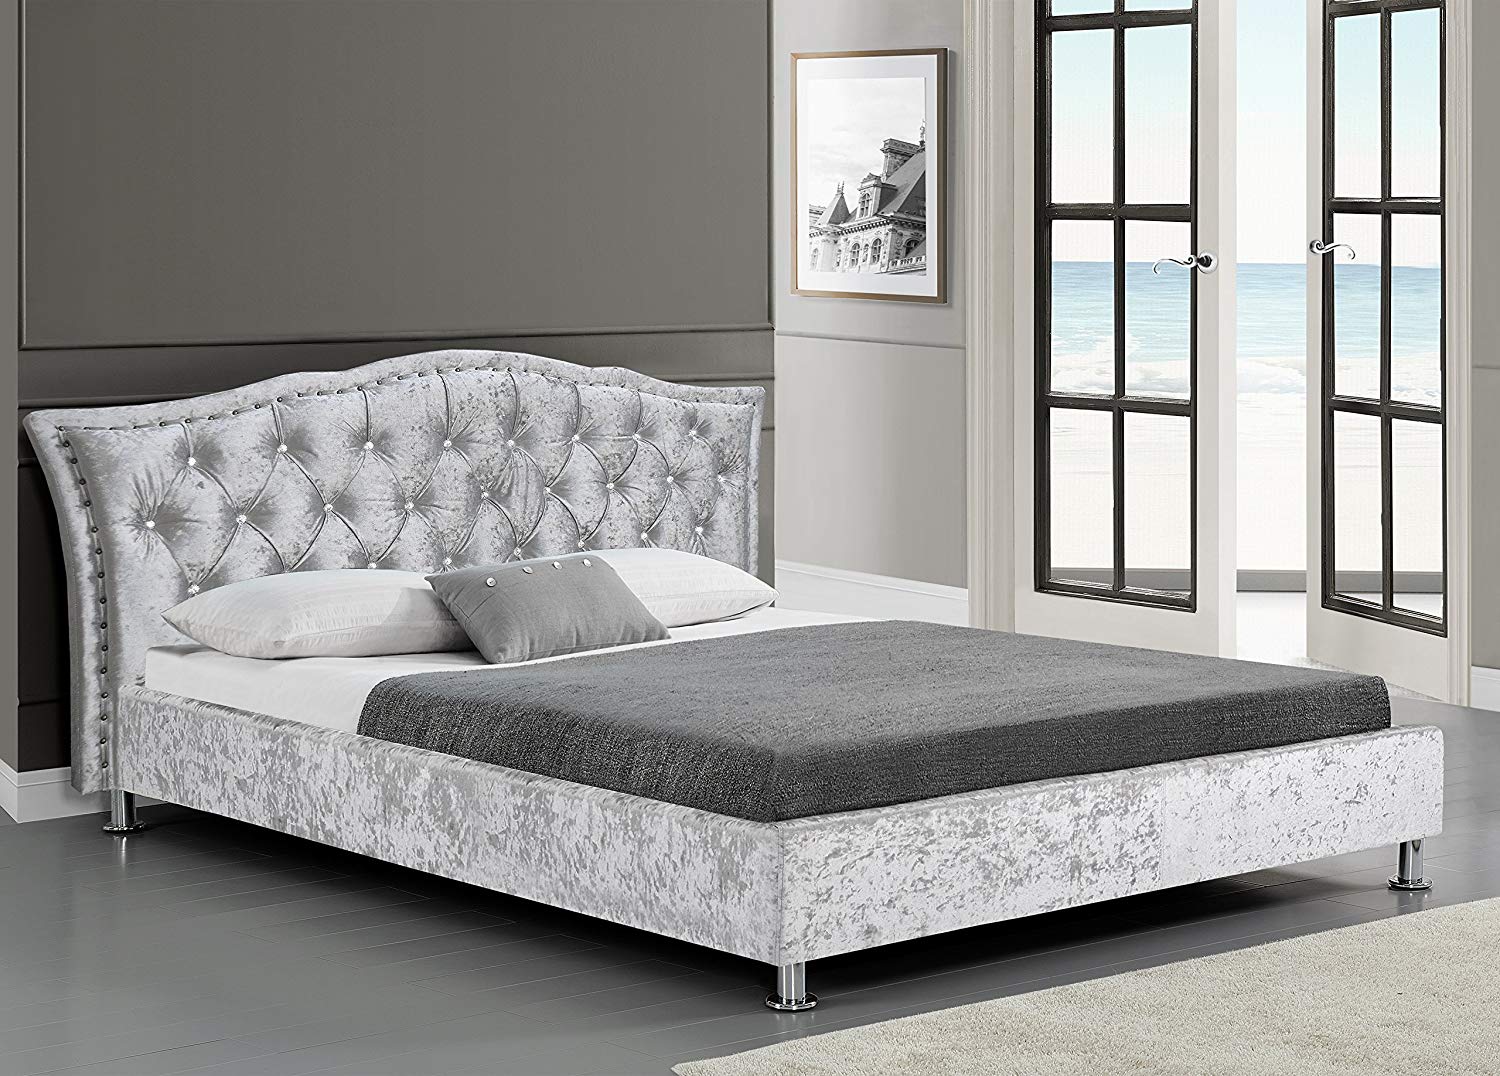 AMARI Crushed Velvet Bed Frame with Tufted Diamante Headboard